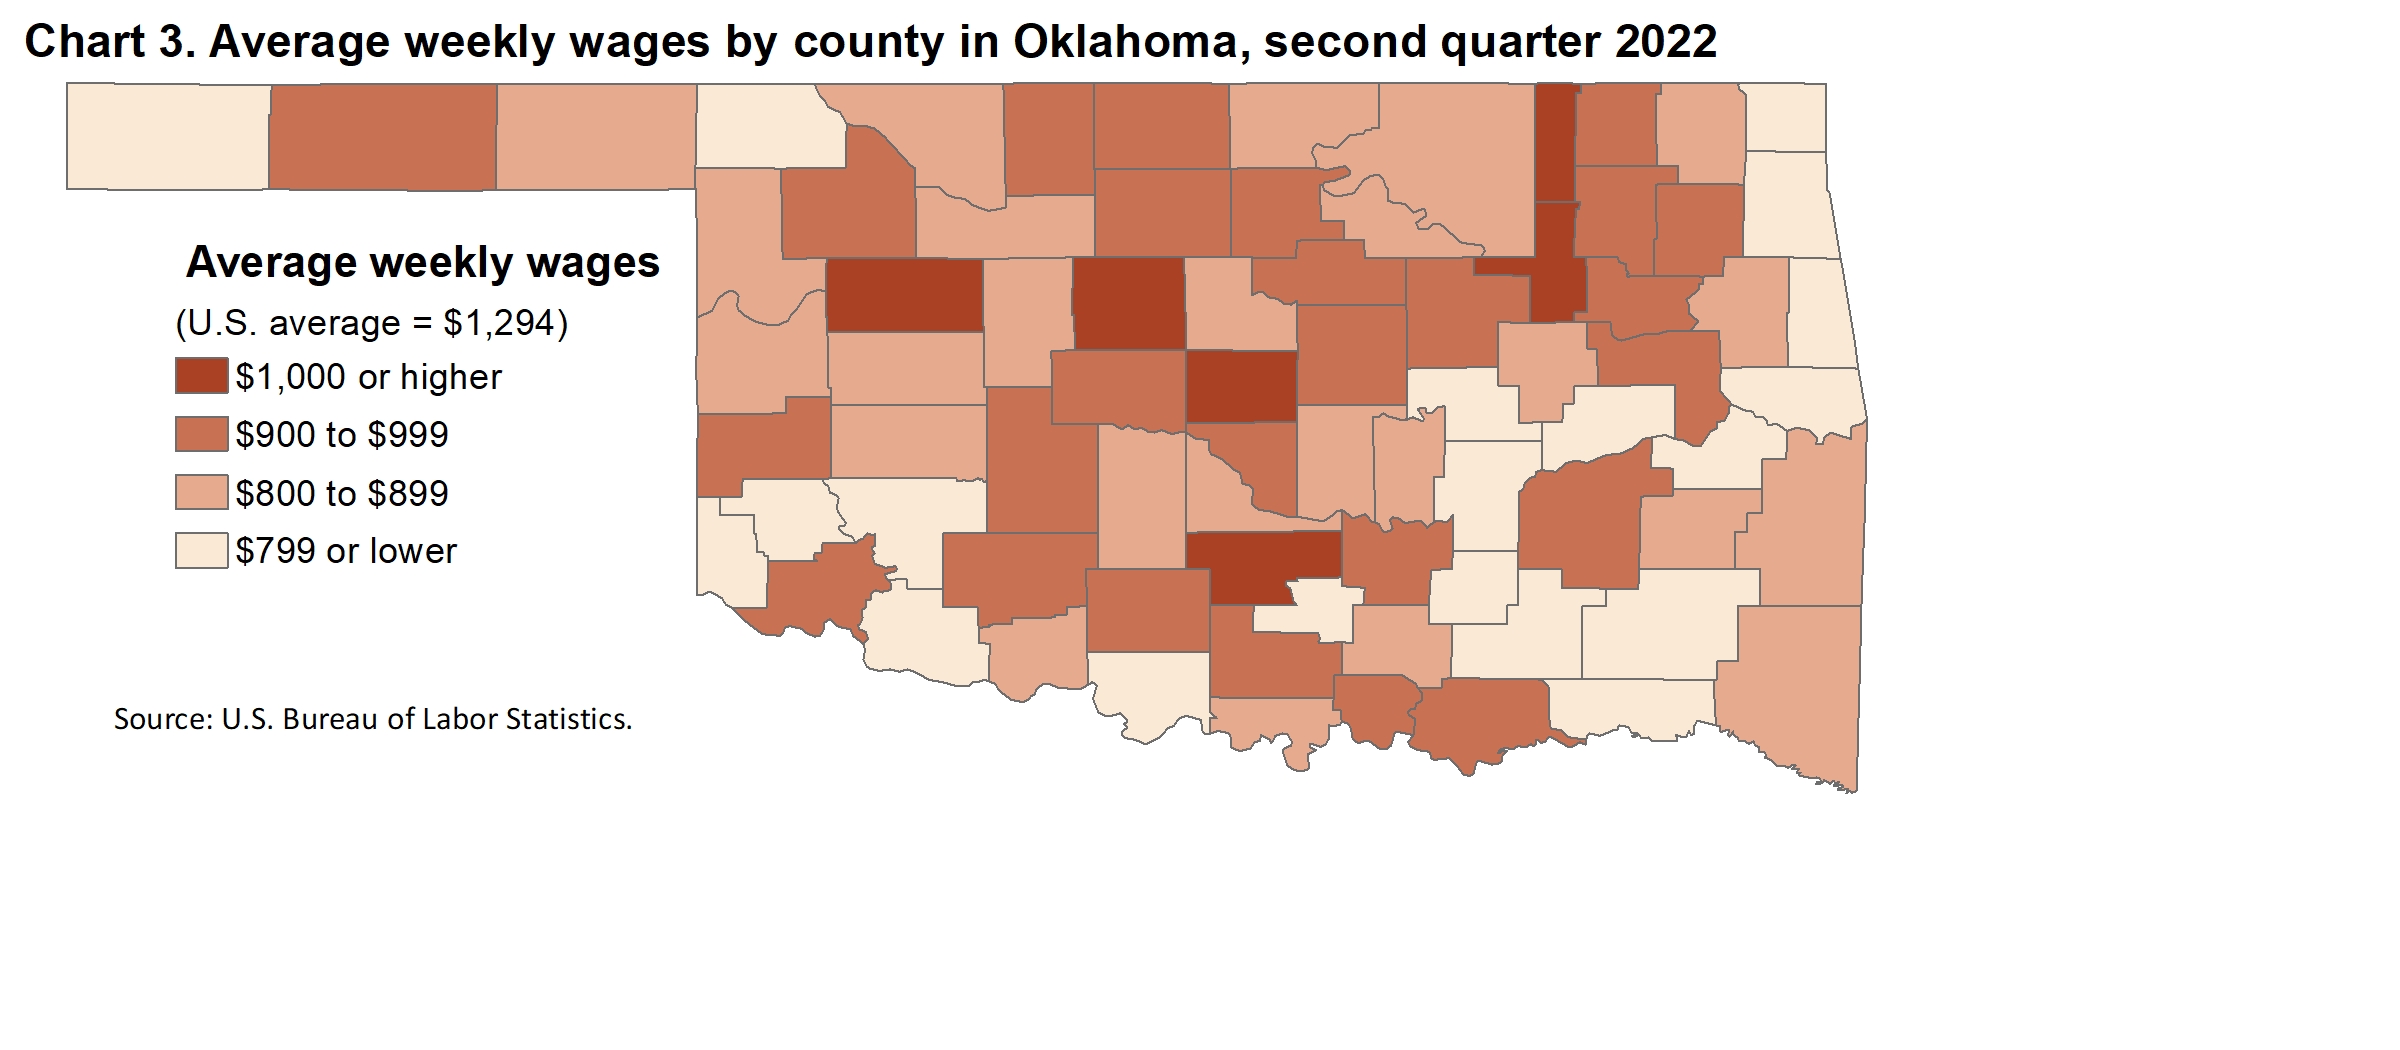 Chart 3. Average weekly wages by county in Oklahoma, second quarter 2022